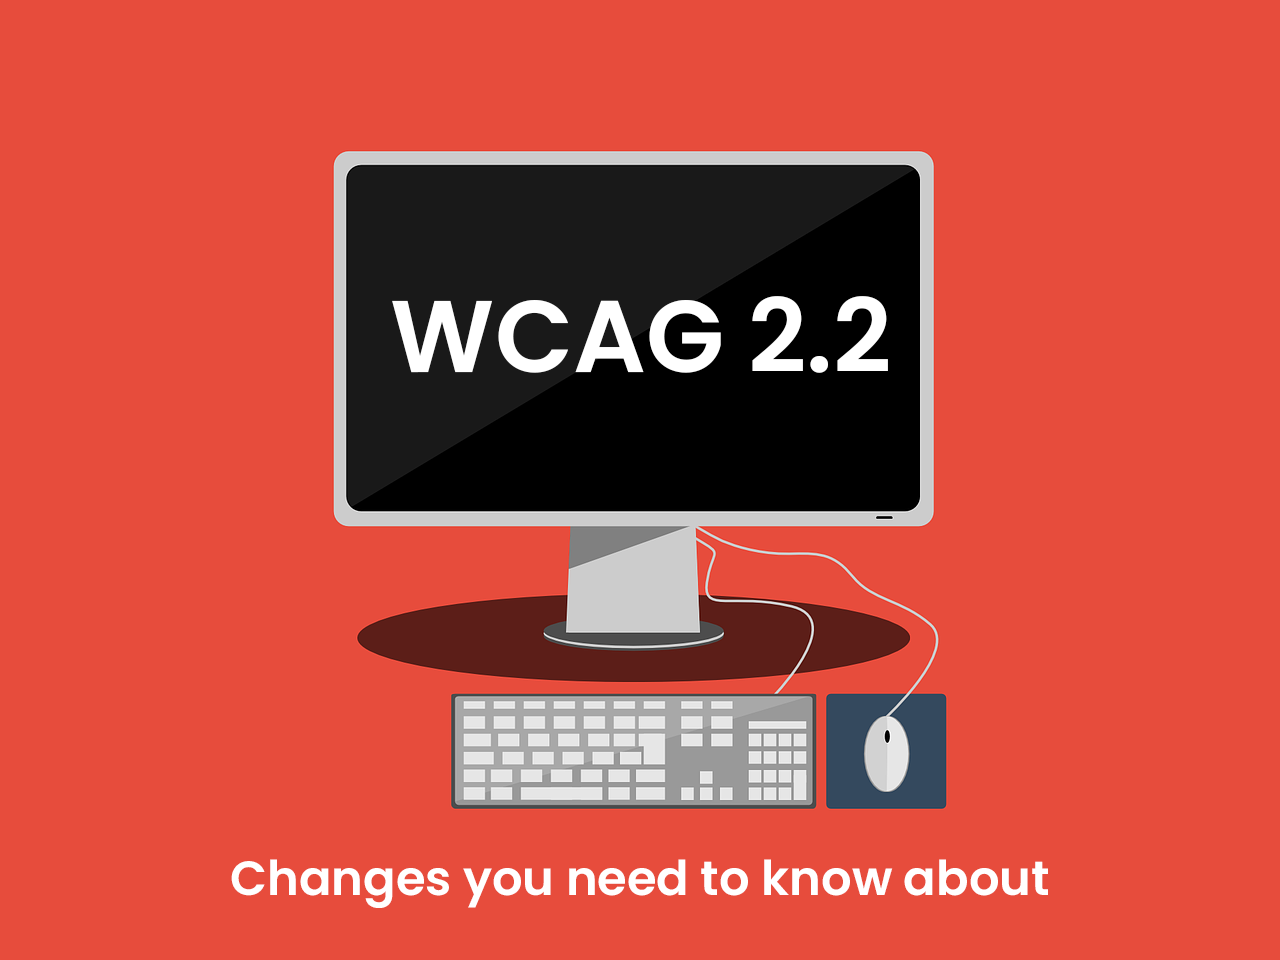 wcag 2.2 accessibility standard for higher education